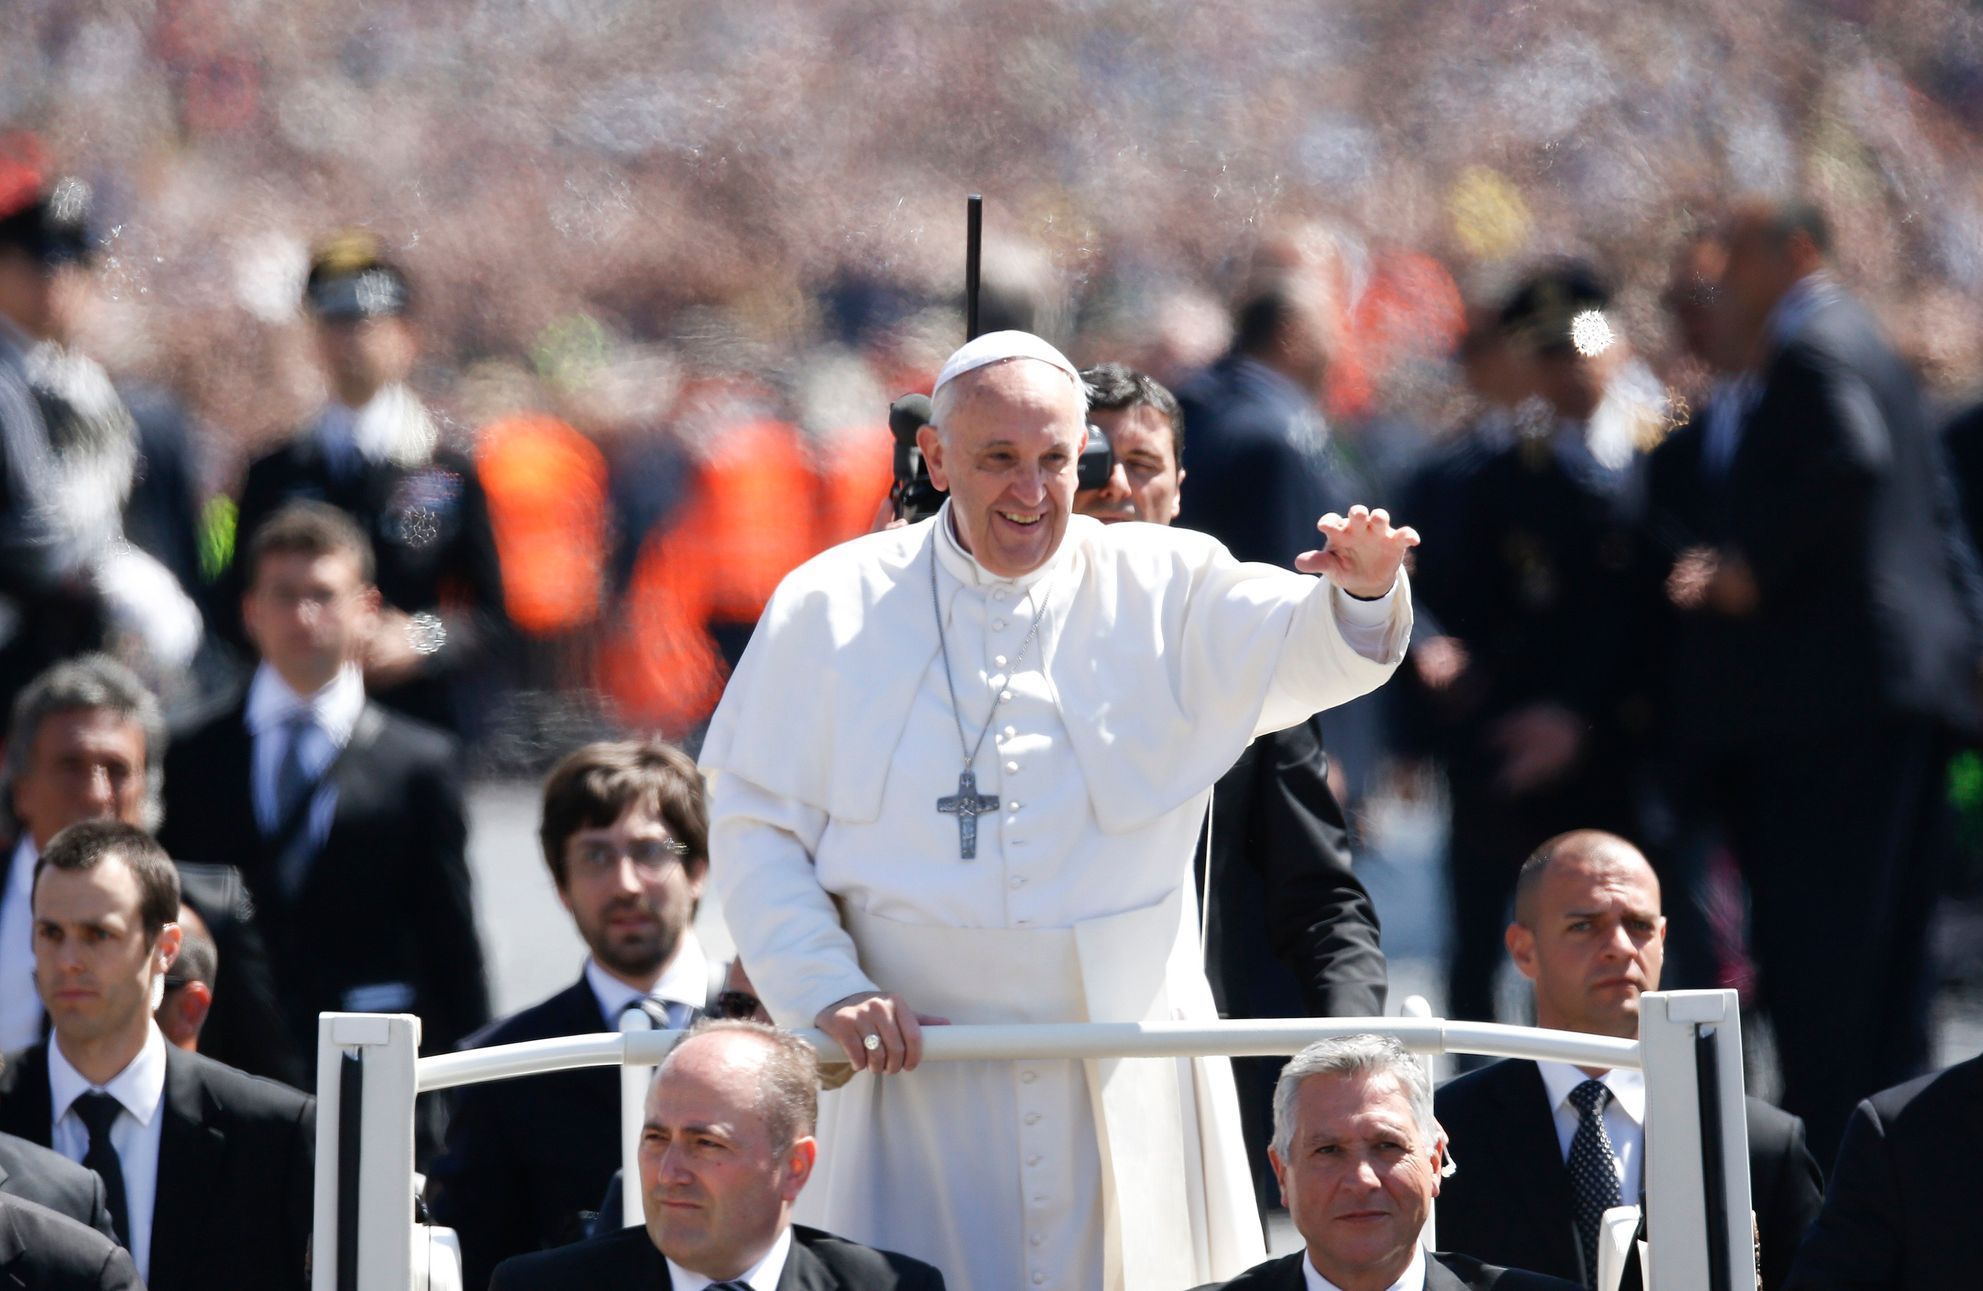 Pope Francis waves as he leads the Easter mass in Saint Peter's Square at the Vatican